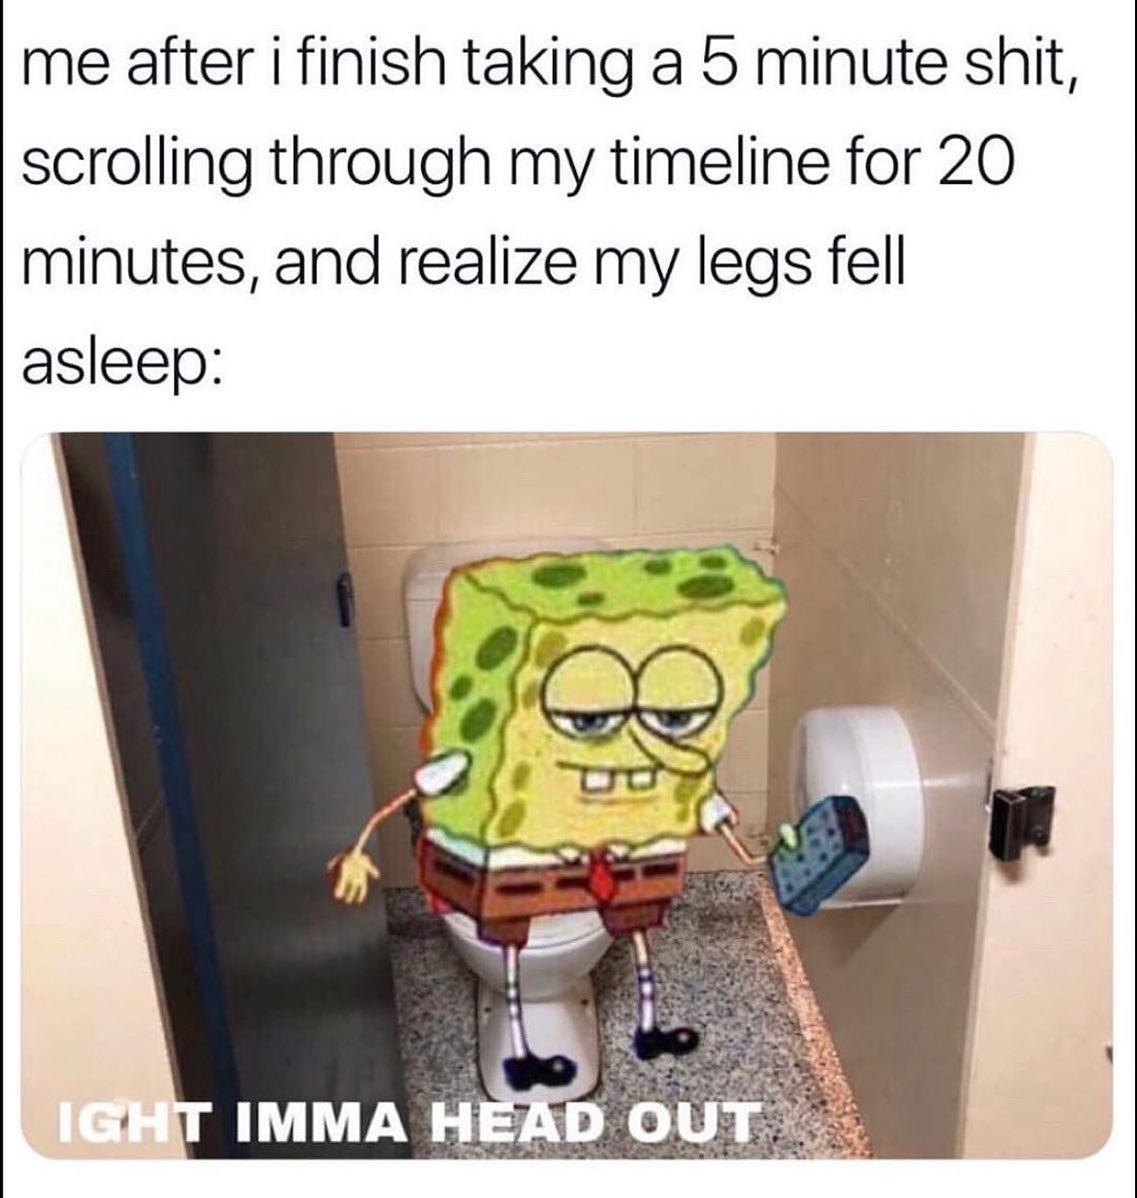 ight ima head out - ight imma head out spongebob memes - me after i finish taking a 5 minute shit, scrolling through my timeline for 20 minutes, and realize my legs fell asleep ee Ight Imma Head Out